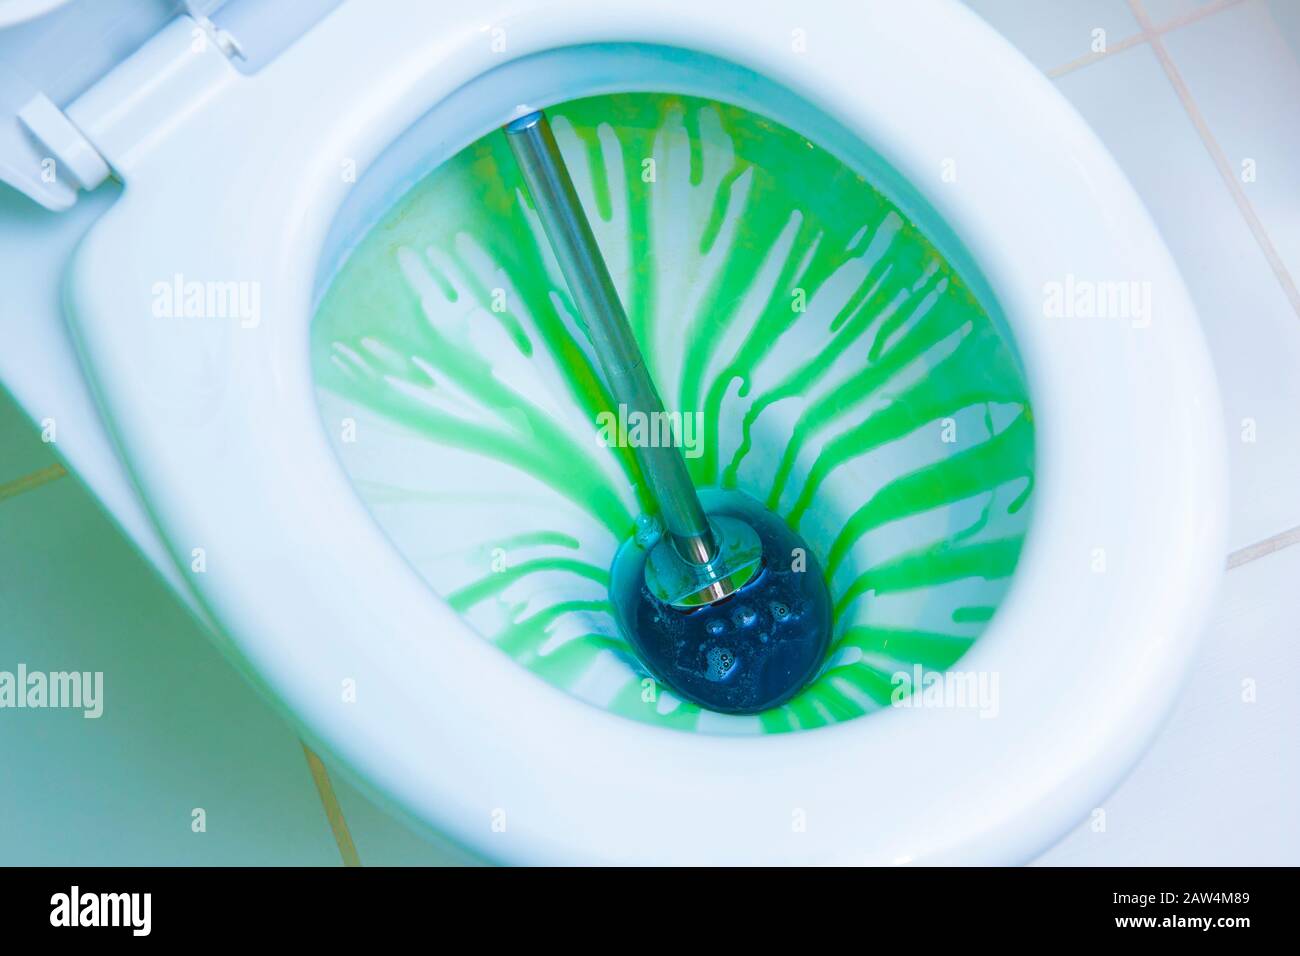 Disinfection of toilet, using colorful antibacterial liquids and cleaning tools. Close up view. Stock Photo